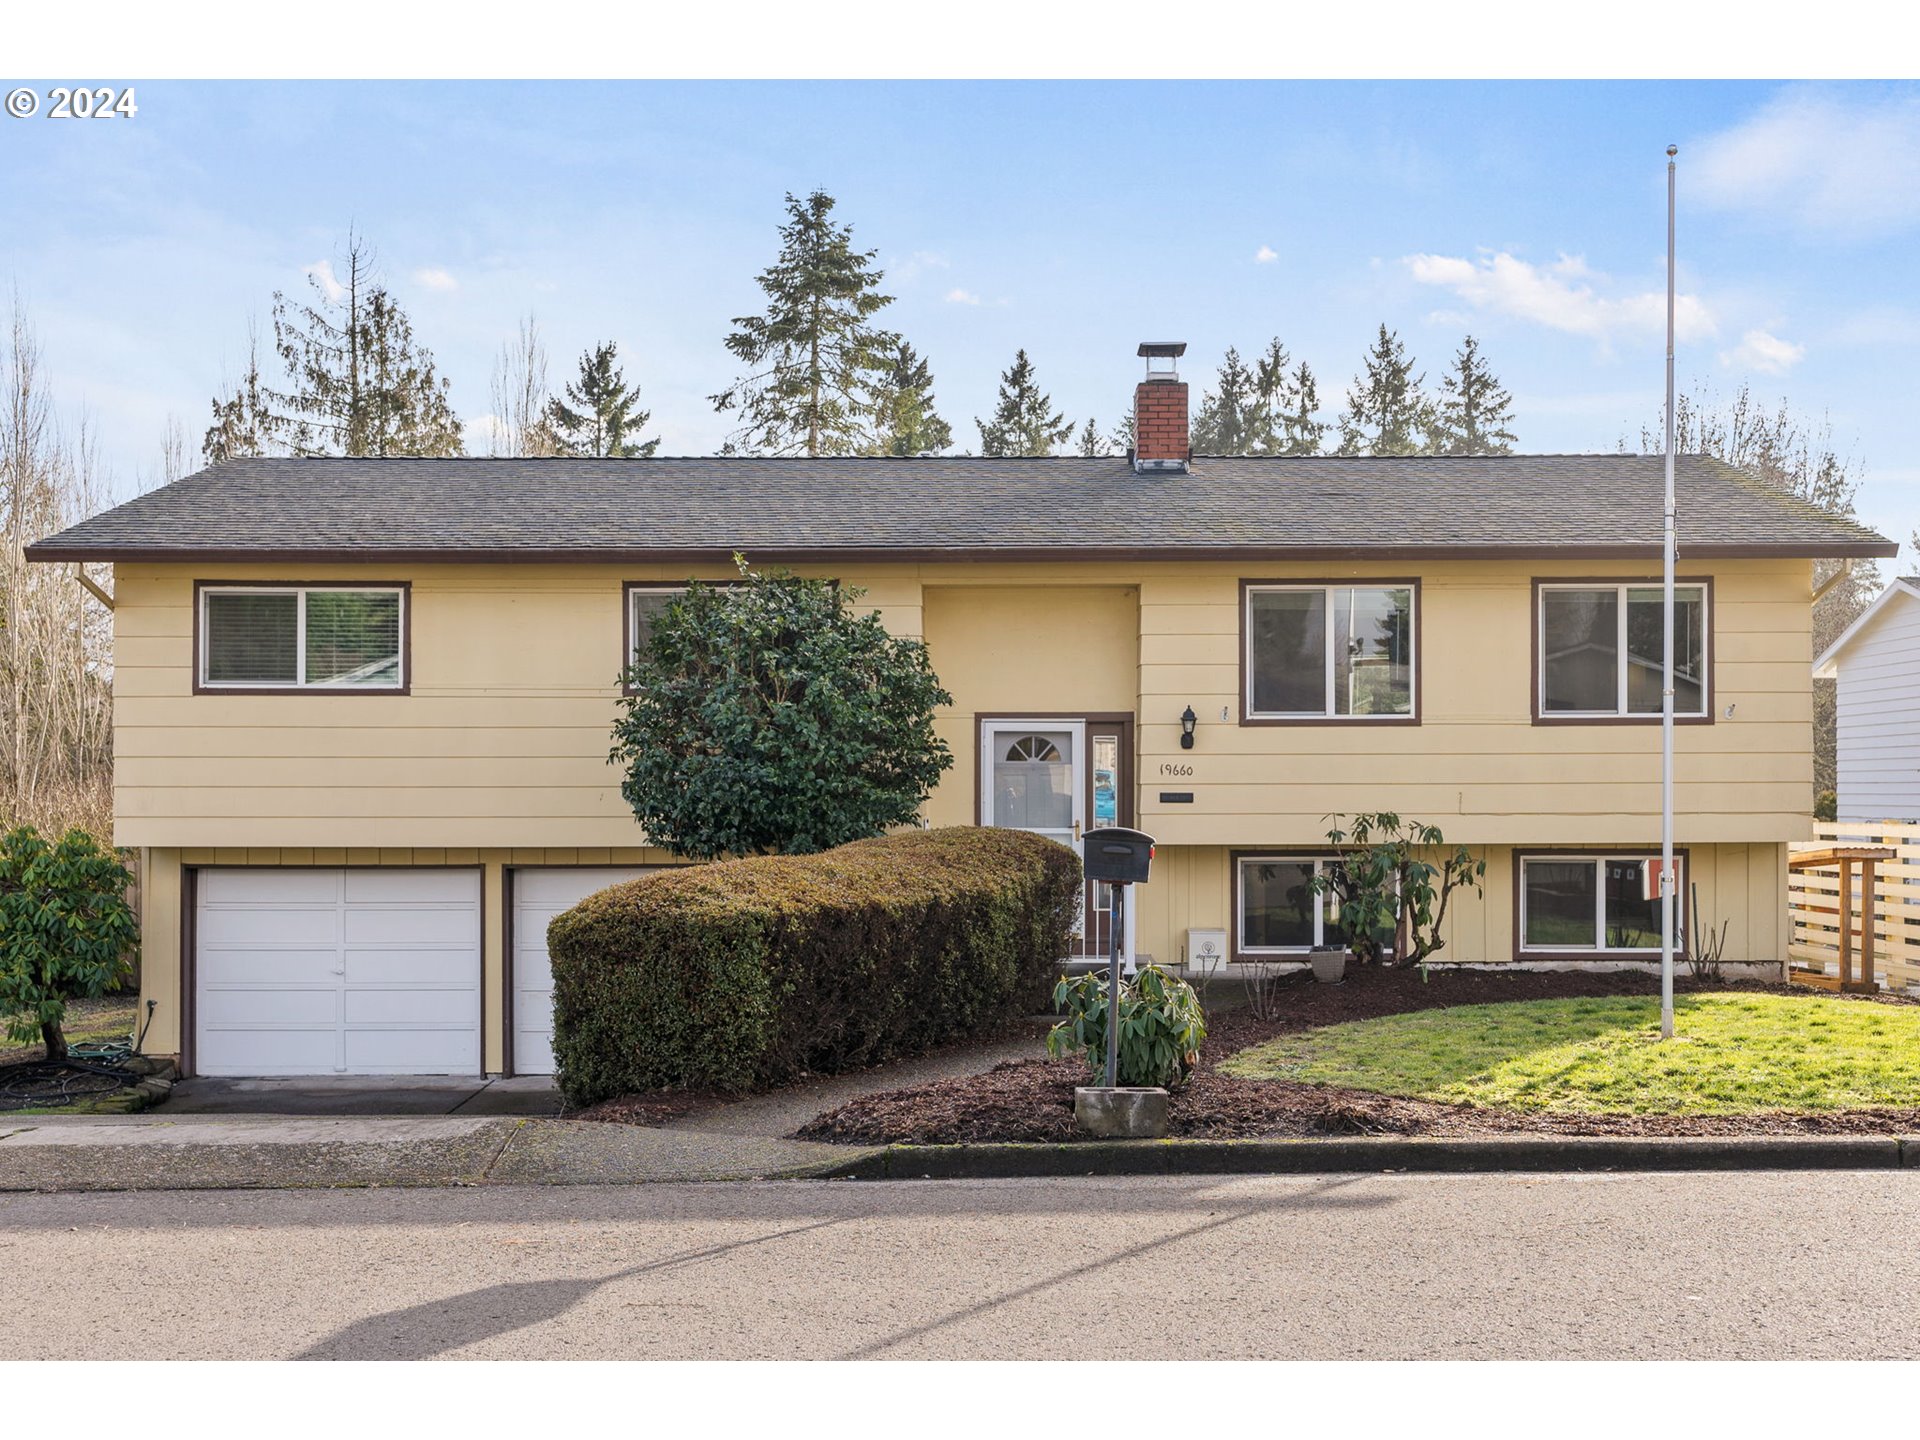 19660 SW ANDERSON ST, Beaverton, OR 